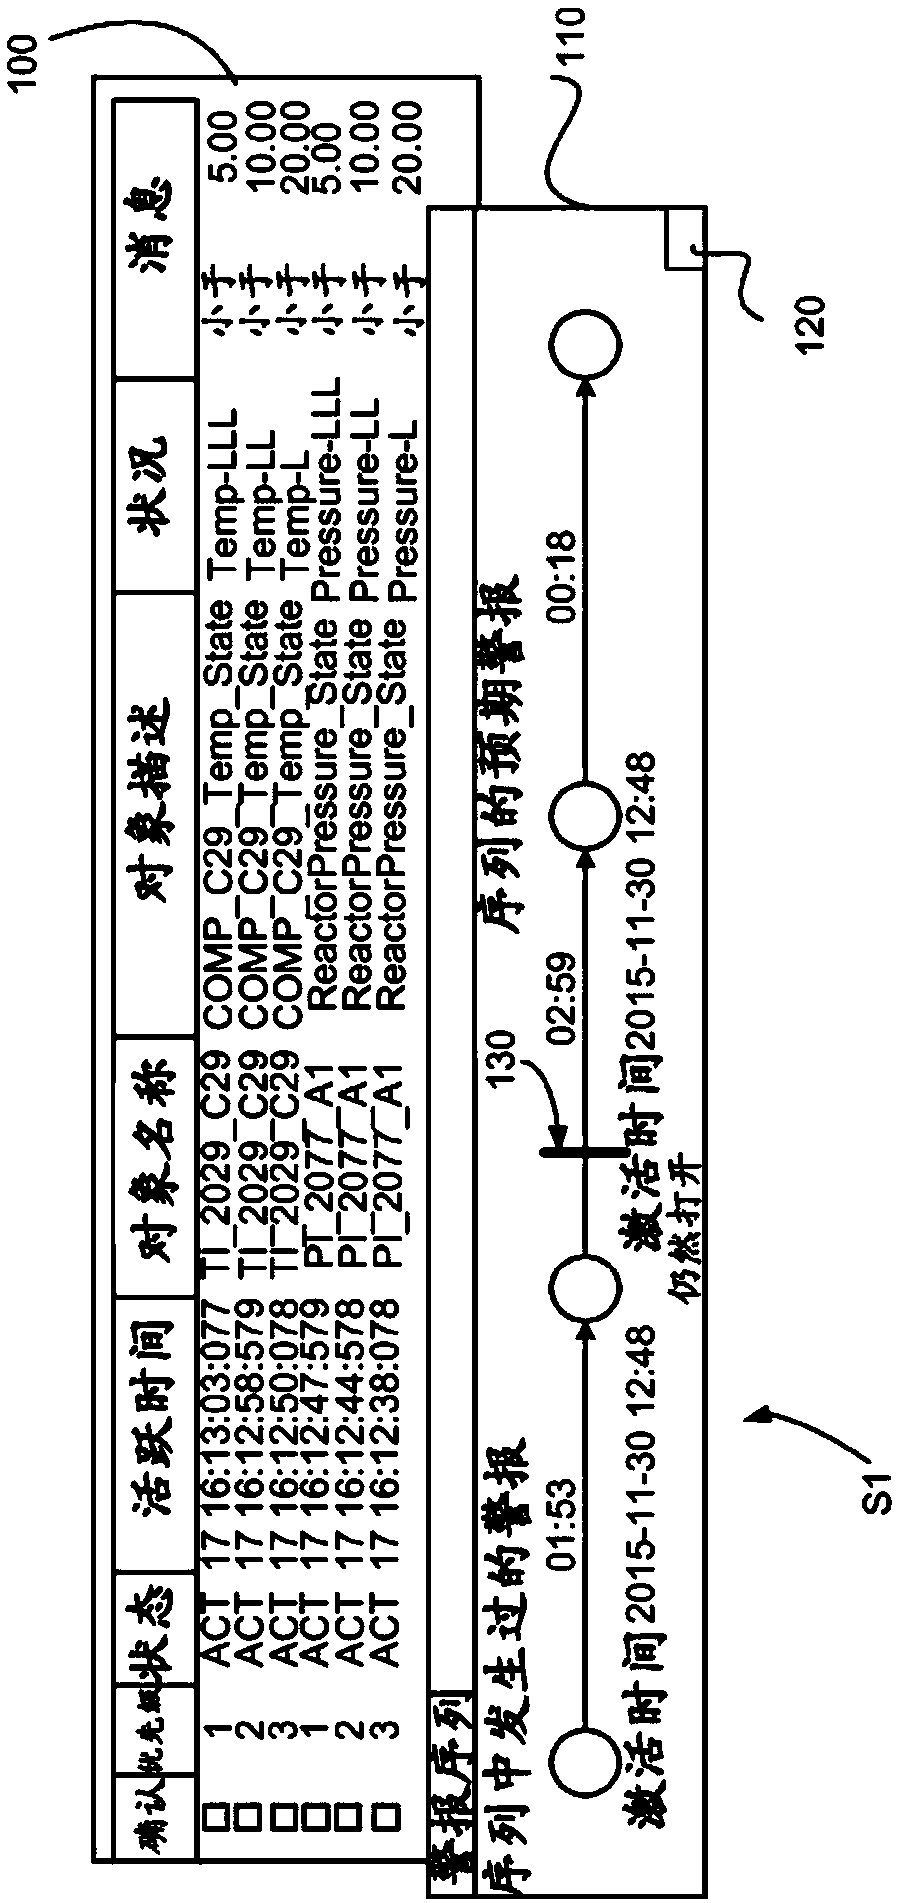 Method of monitoring and controlling industrial process, and process control system